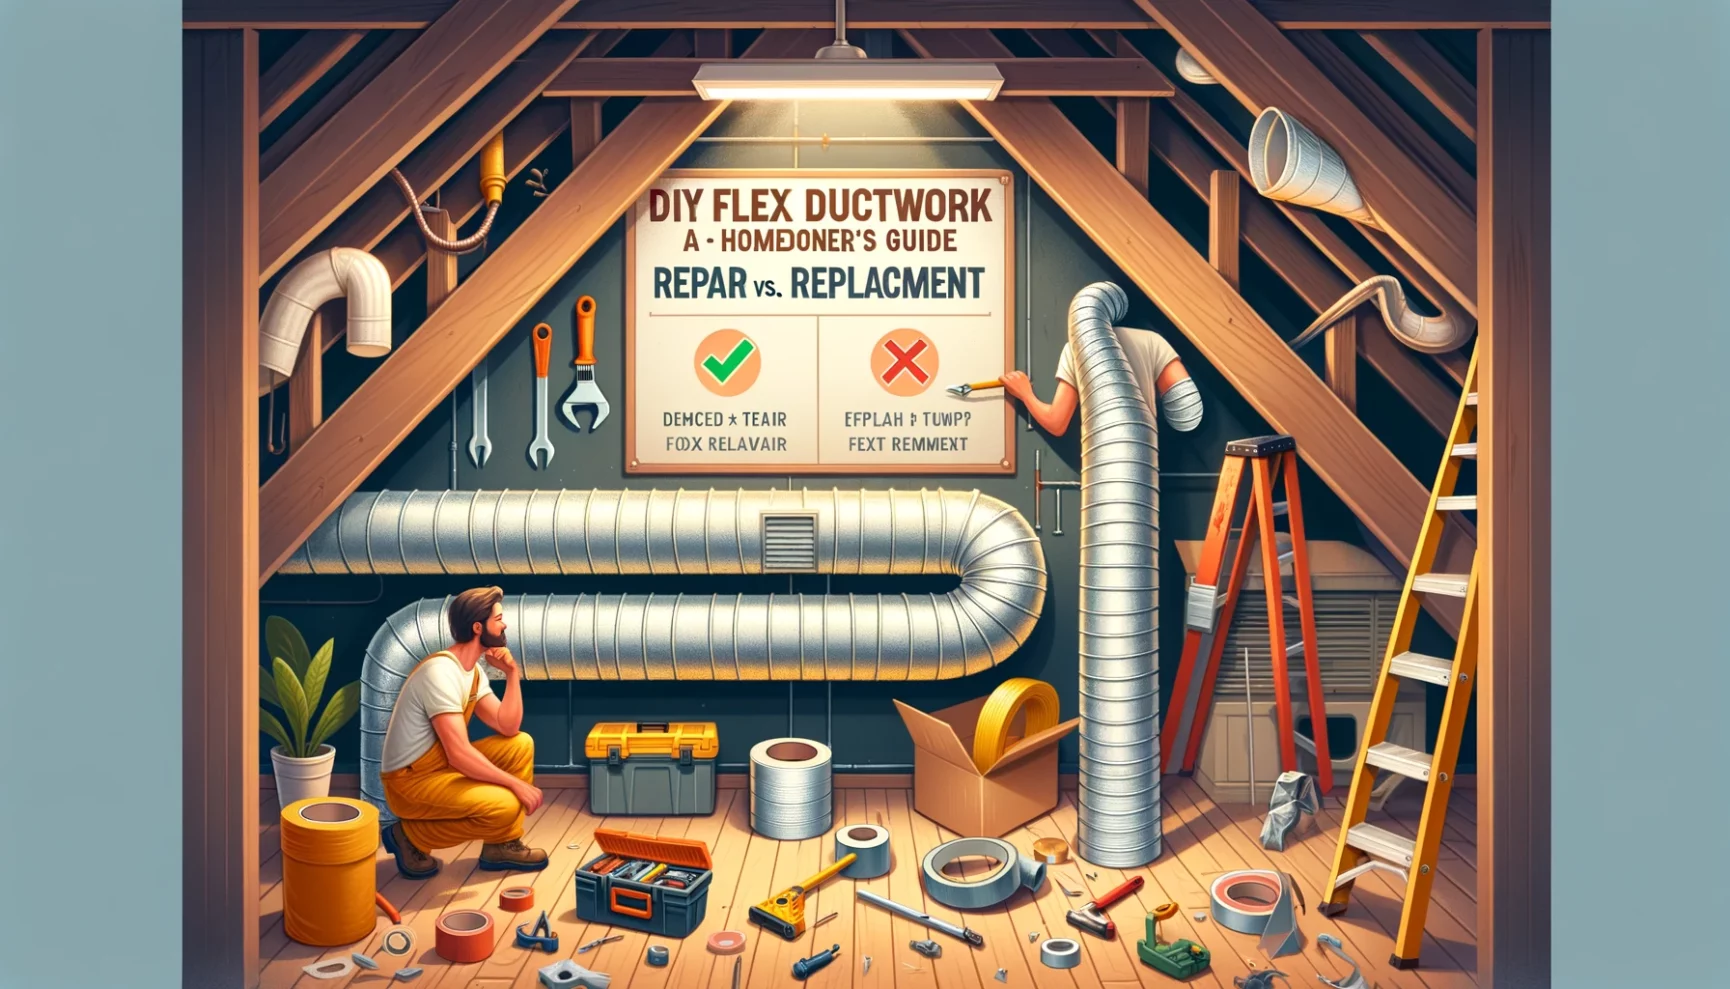 A cartoon illustration of a man working in an attic, performing a DIY flex ductwork repair.